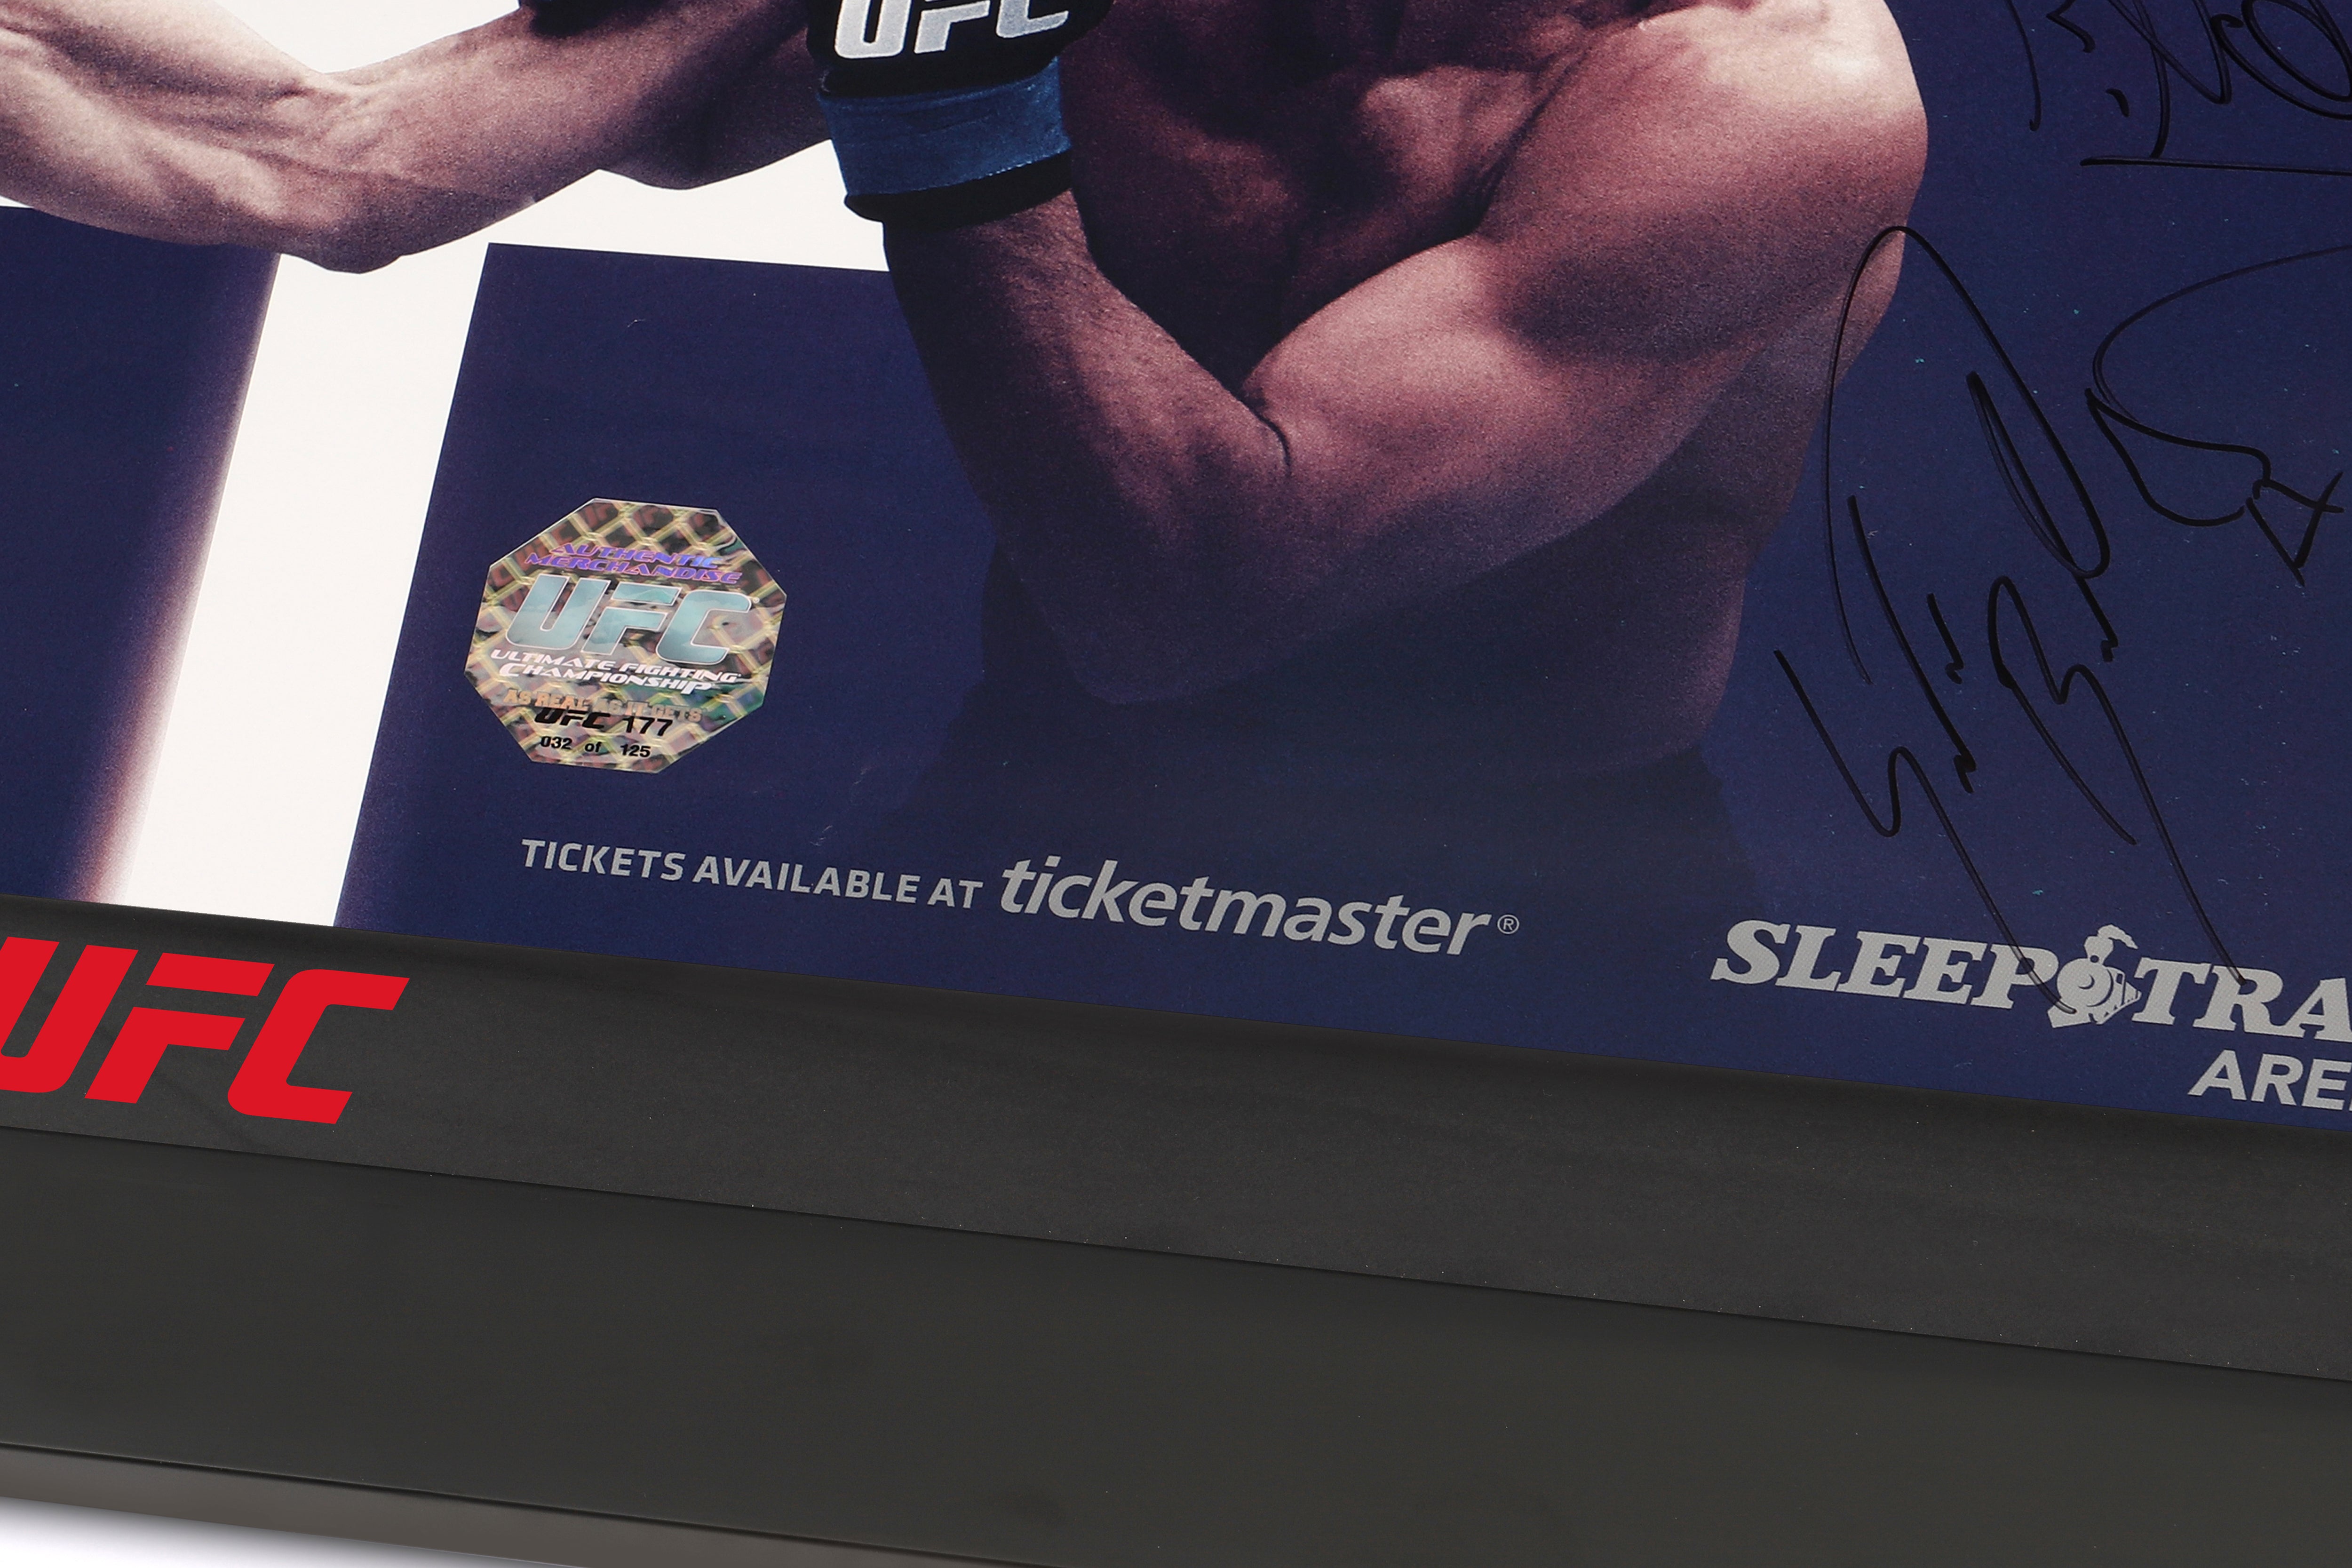 official signed poster from UFC 177